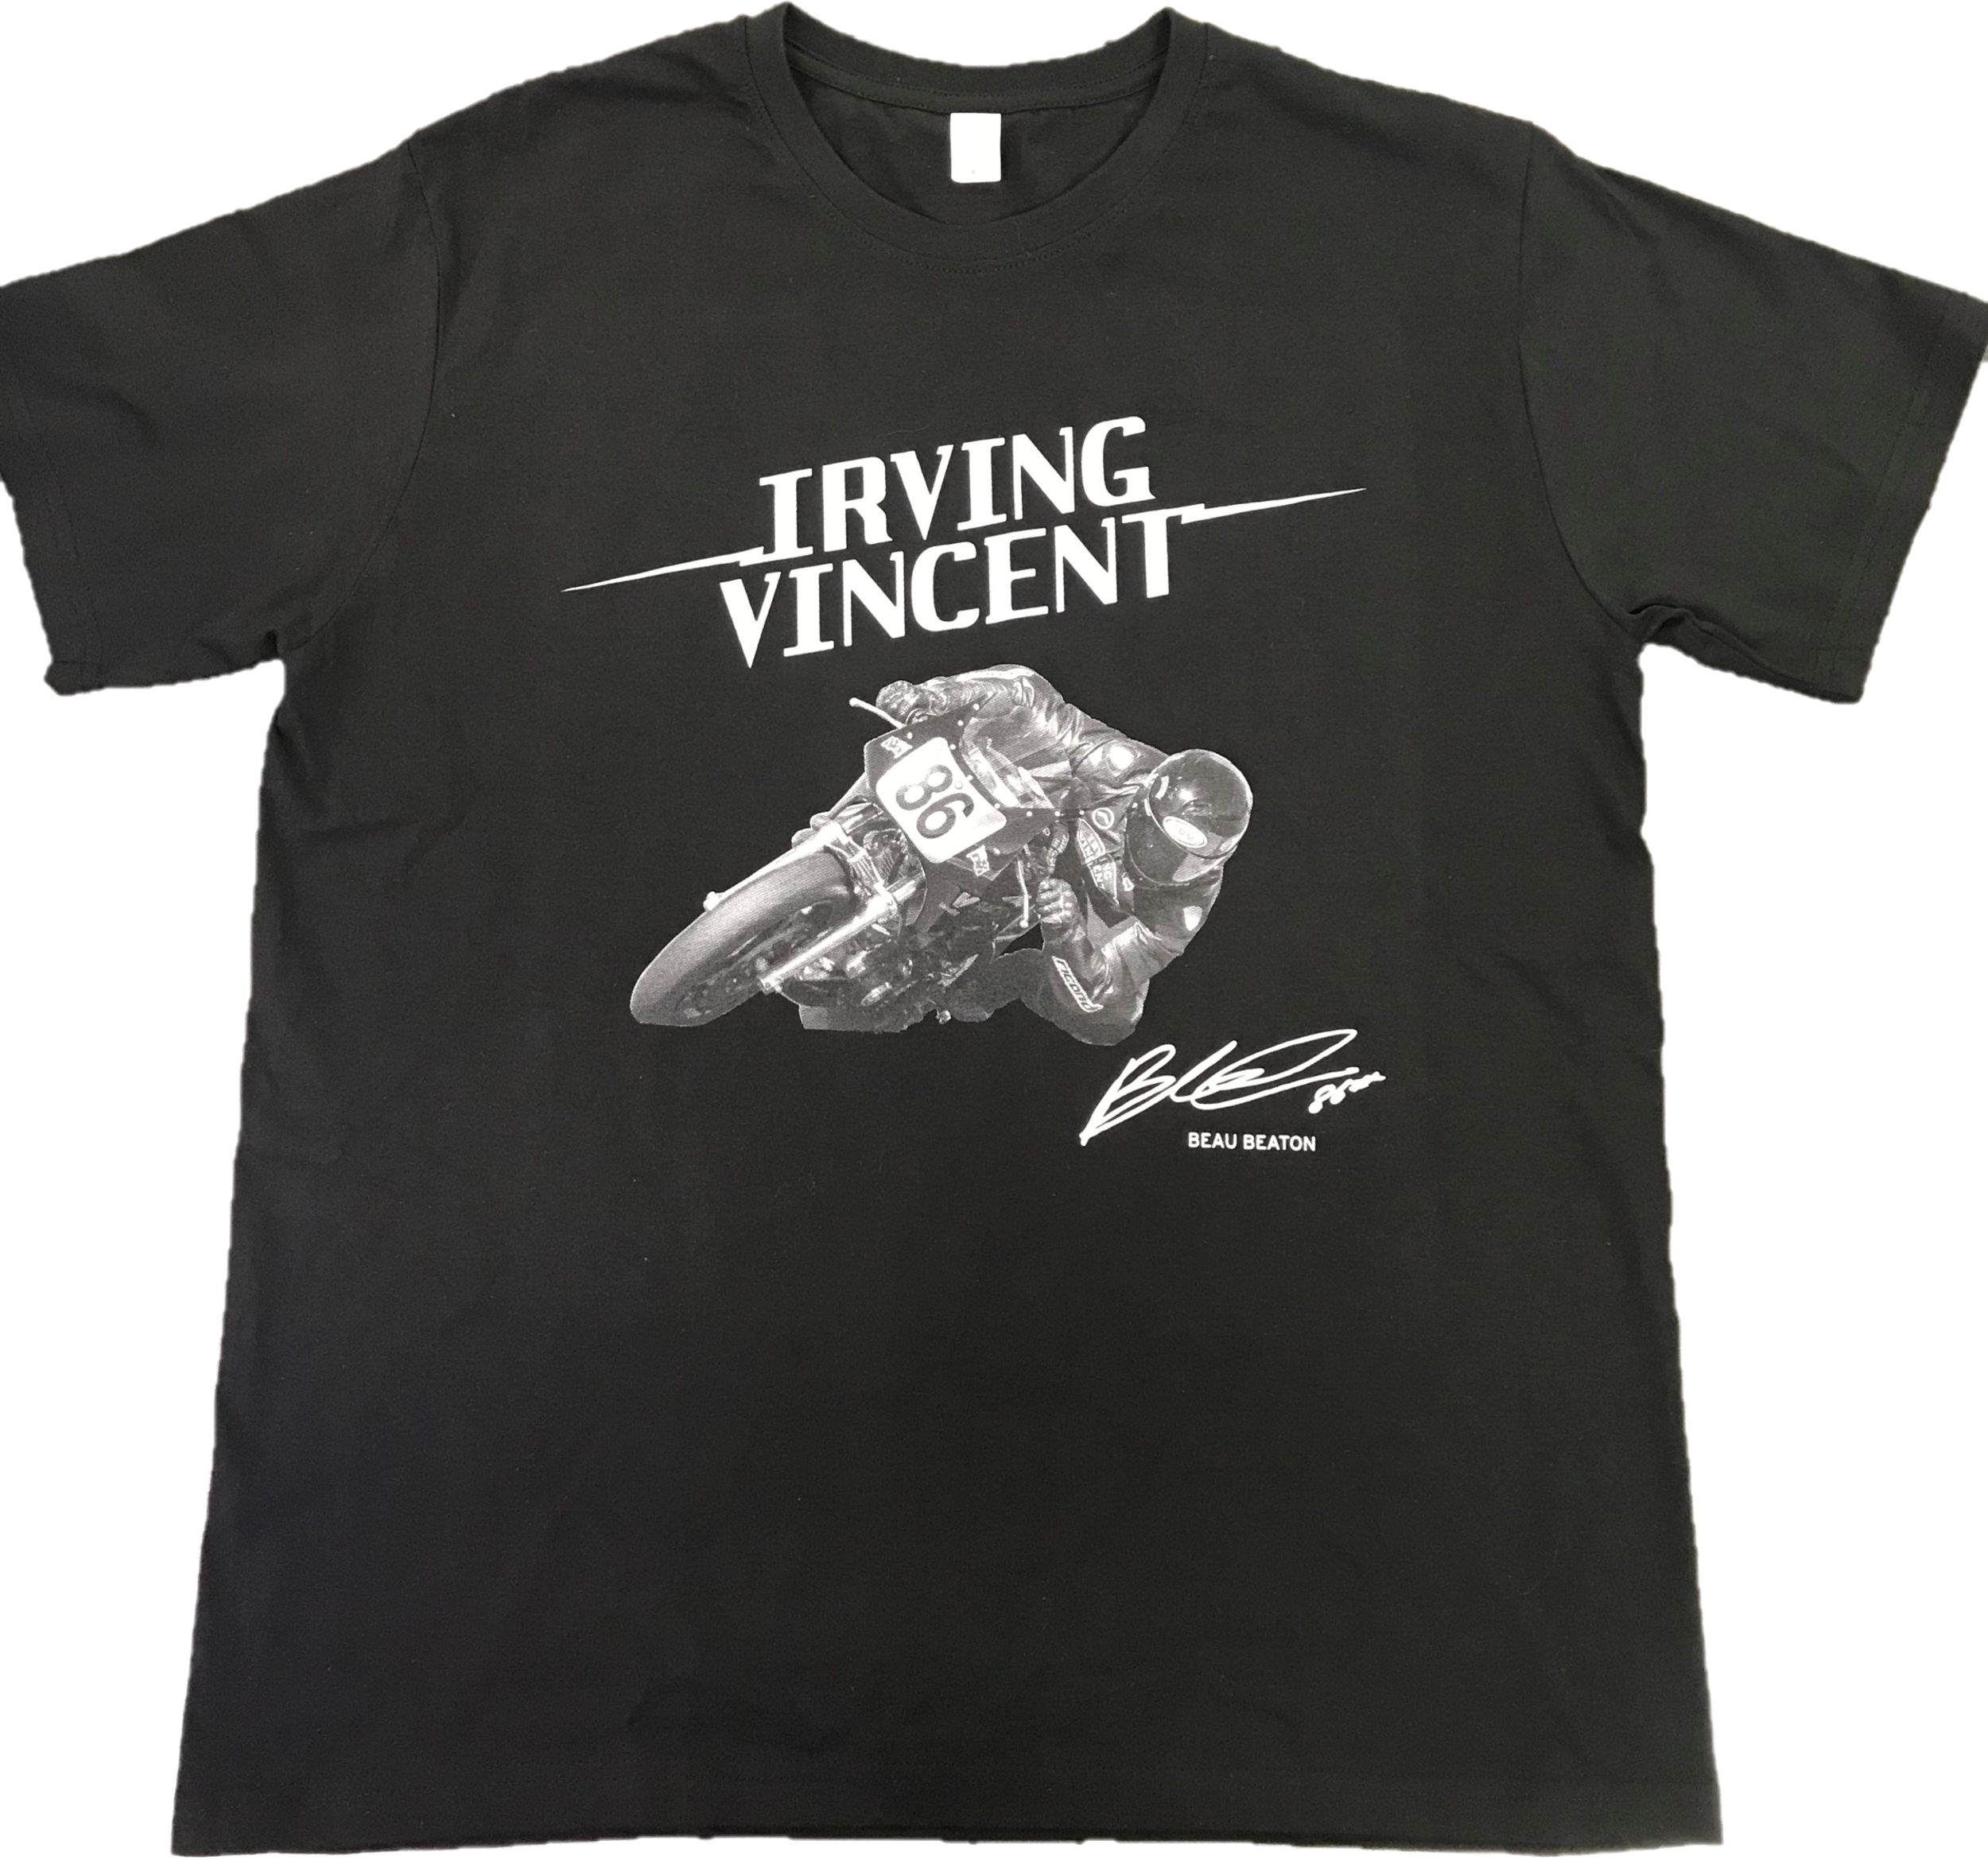 Irving Vincent Rider Tees